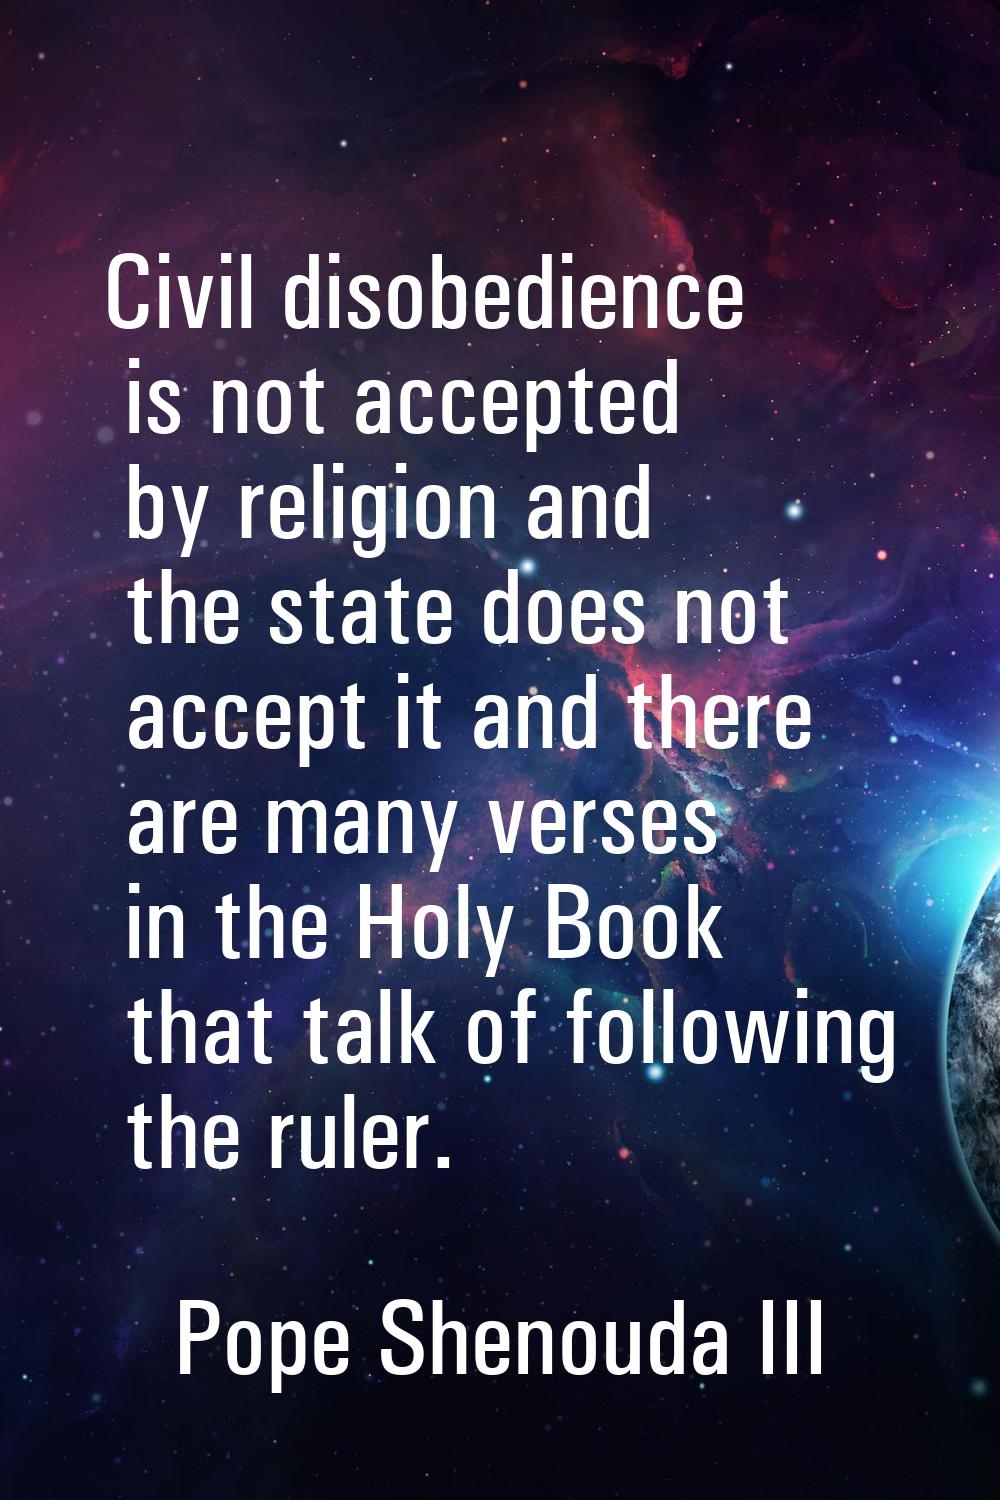 Civil disobedience is not accepted by religion and the state does not accept it and there are many 